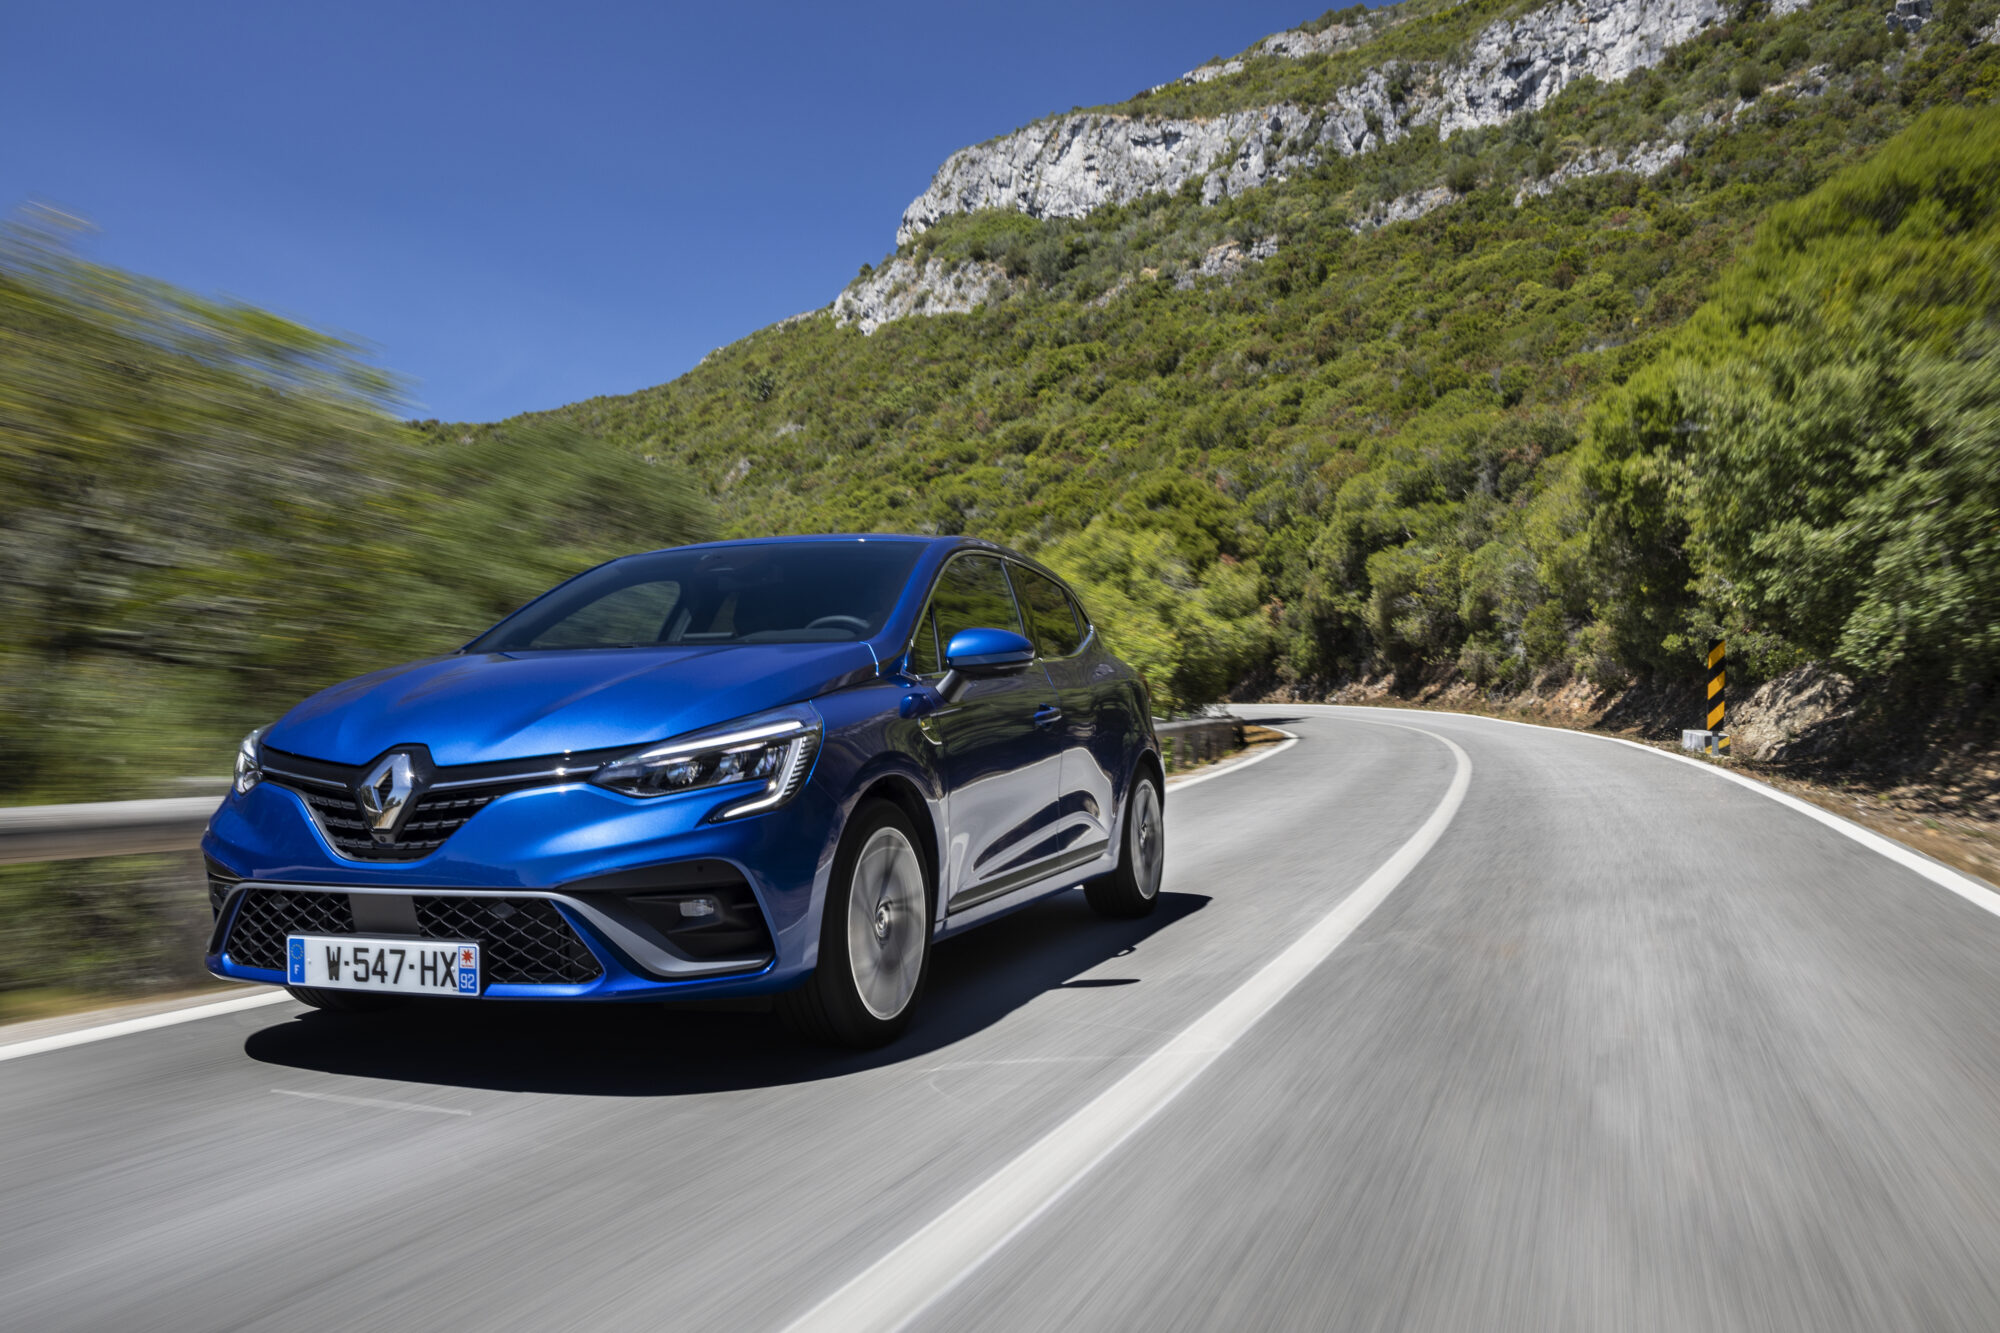 2019 - New Renault CLIO test drive in Portugal